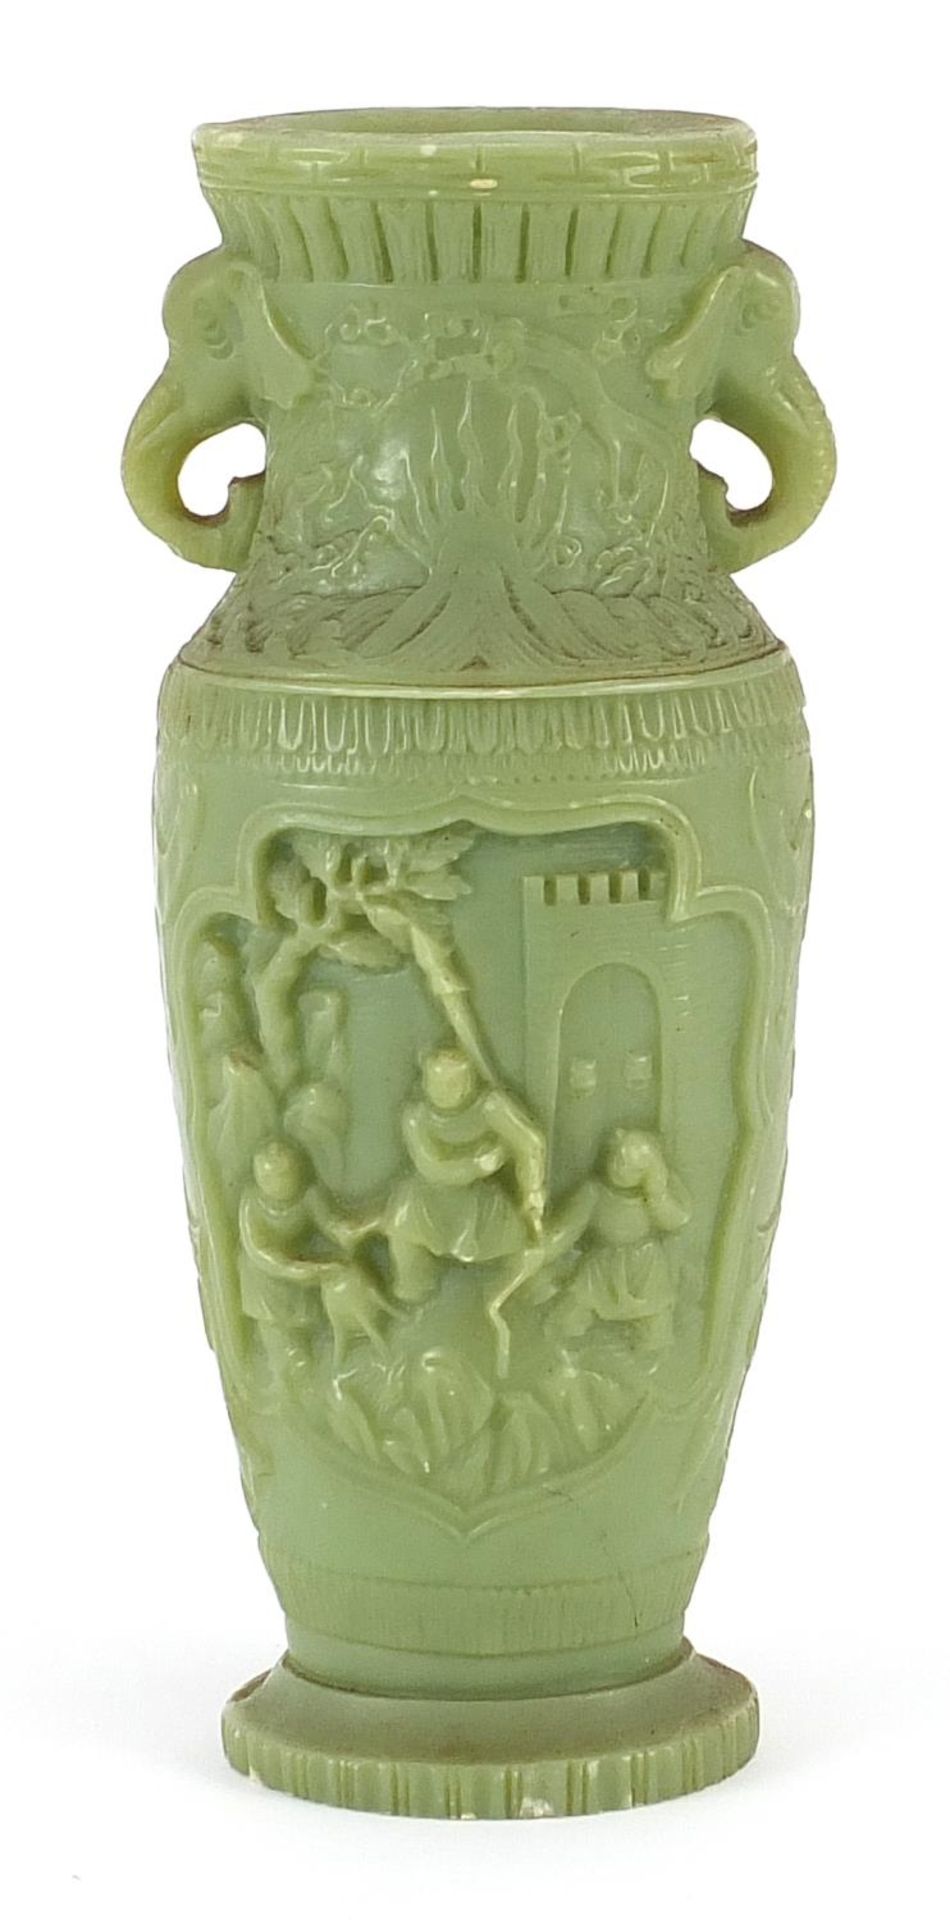 Modern Chinese jade style vase with elephant head handles, 24cm high - Image 2 of 3